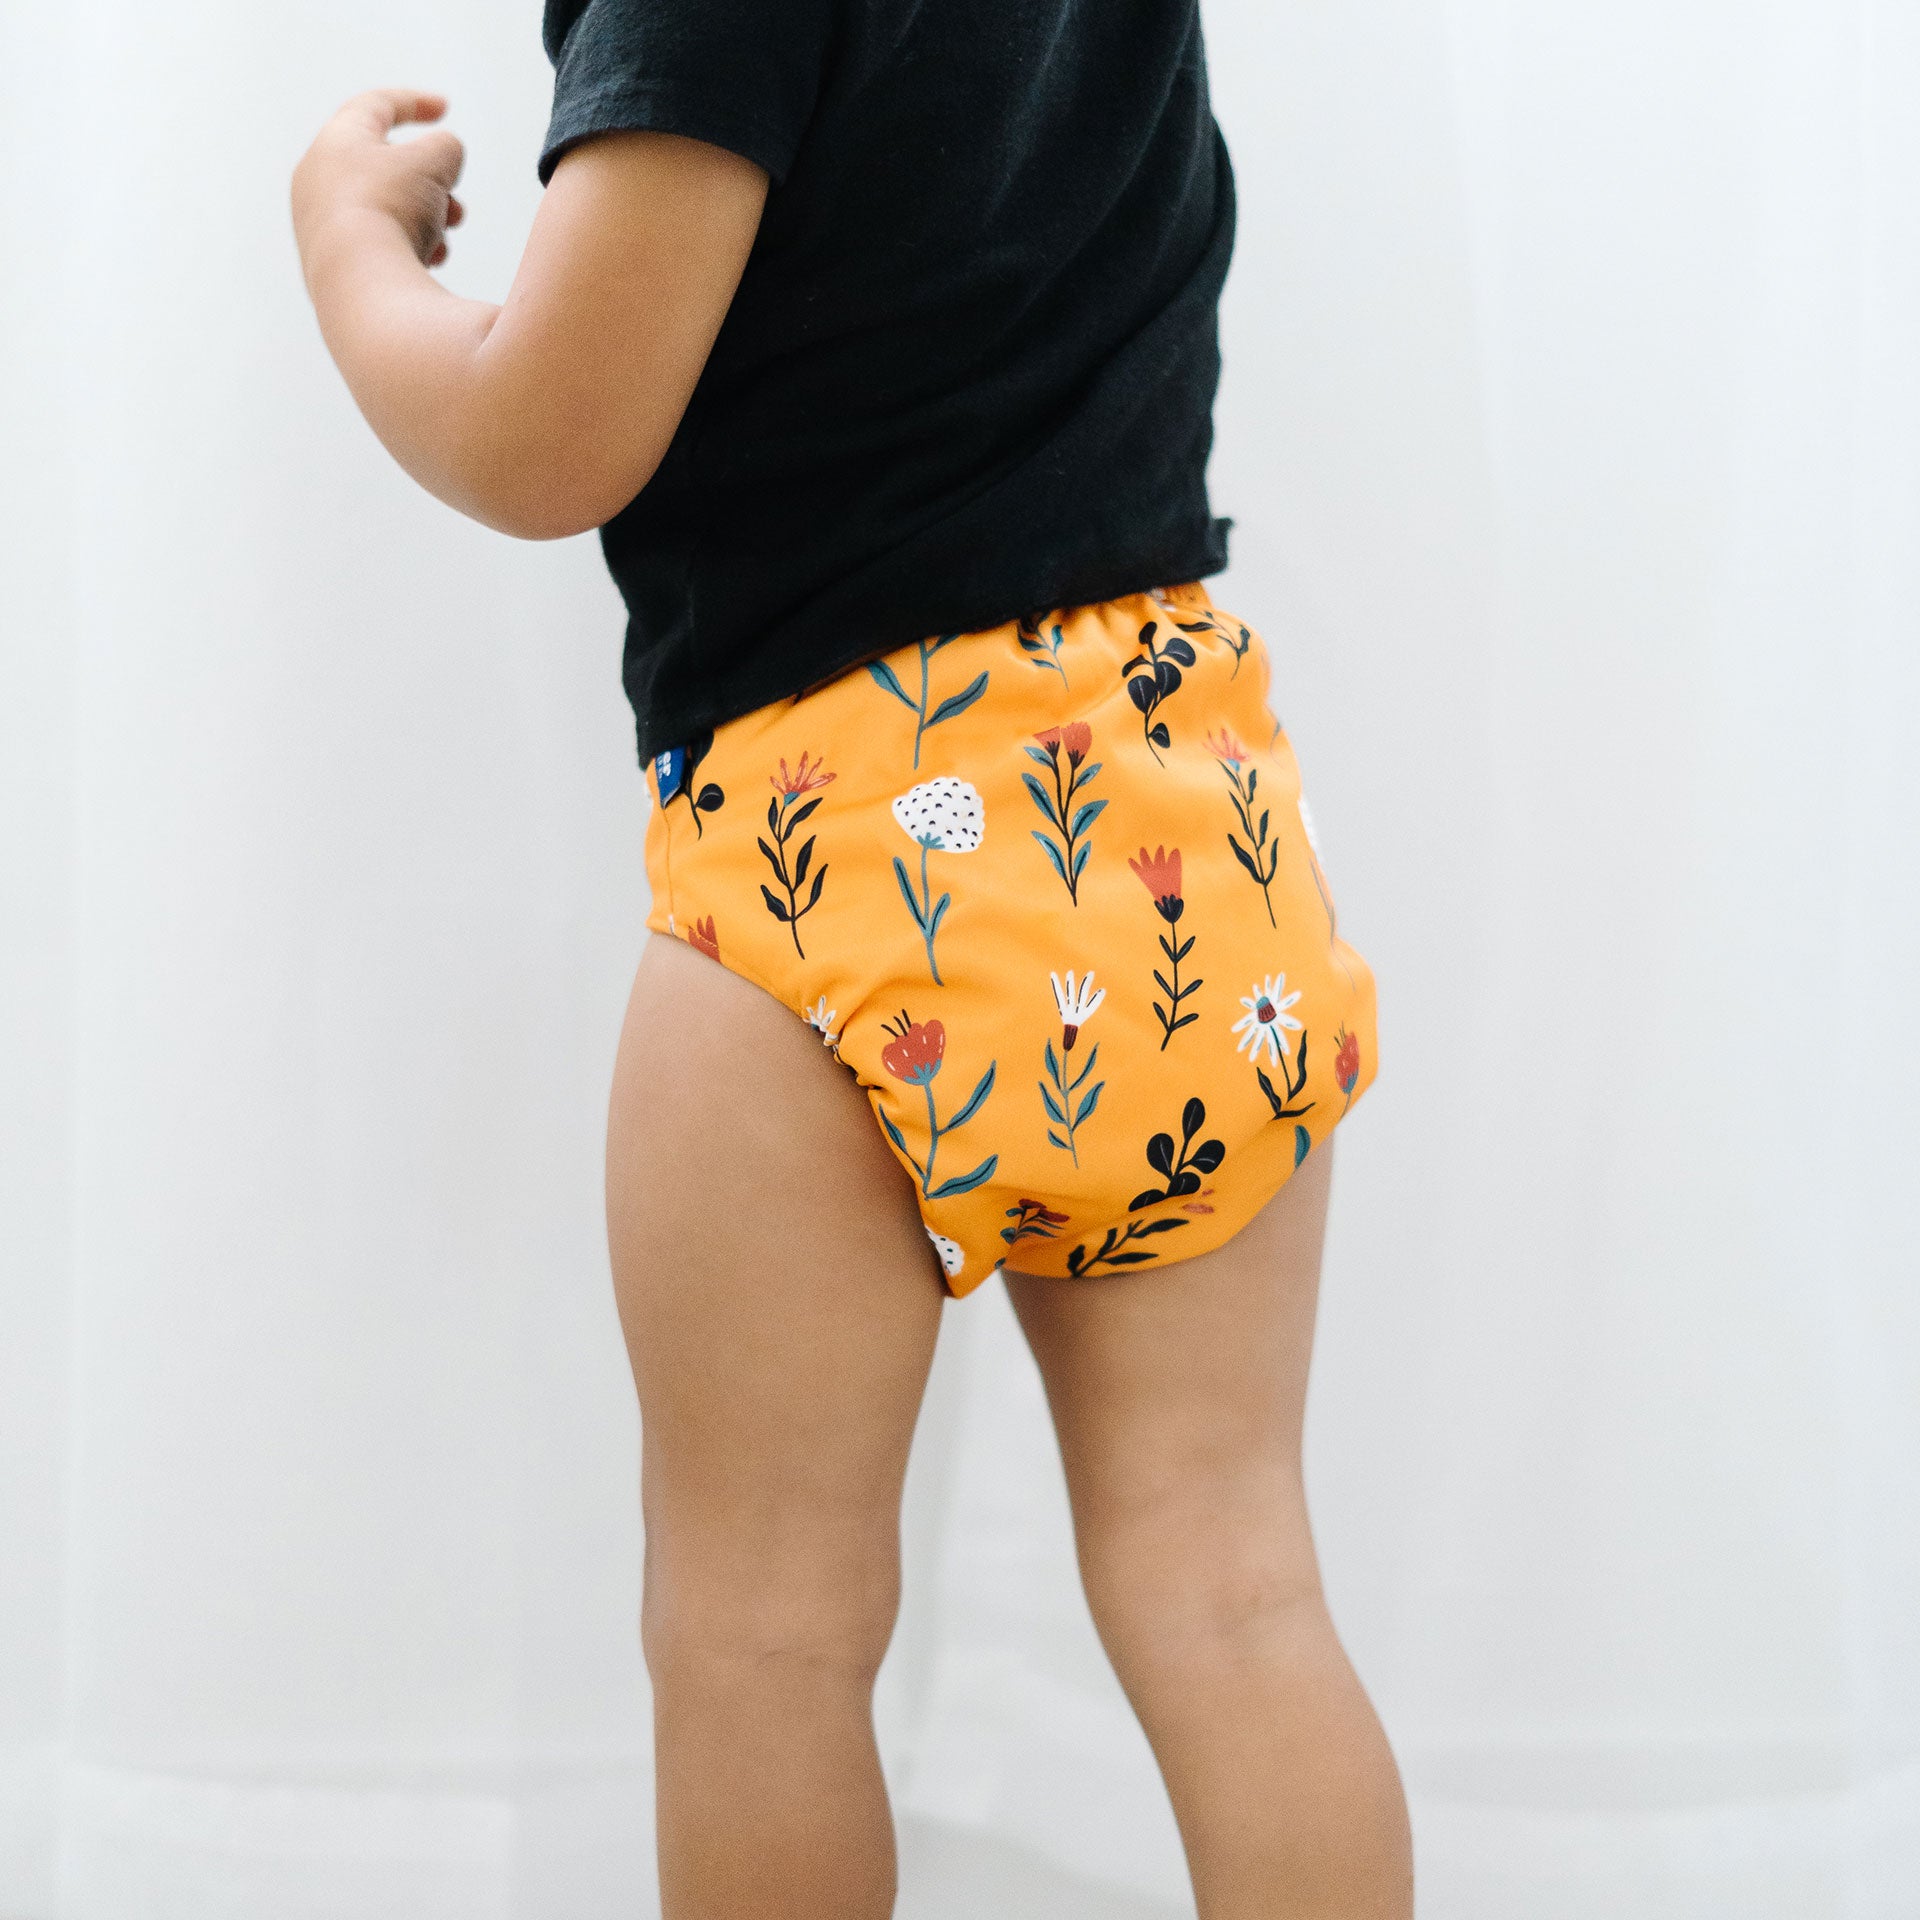 New Parent Starter Bundles: Pocket Cloth Diapers with Athletic Wicking –  Kinder Cloth Diaper Co.